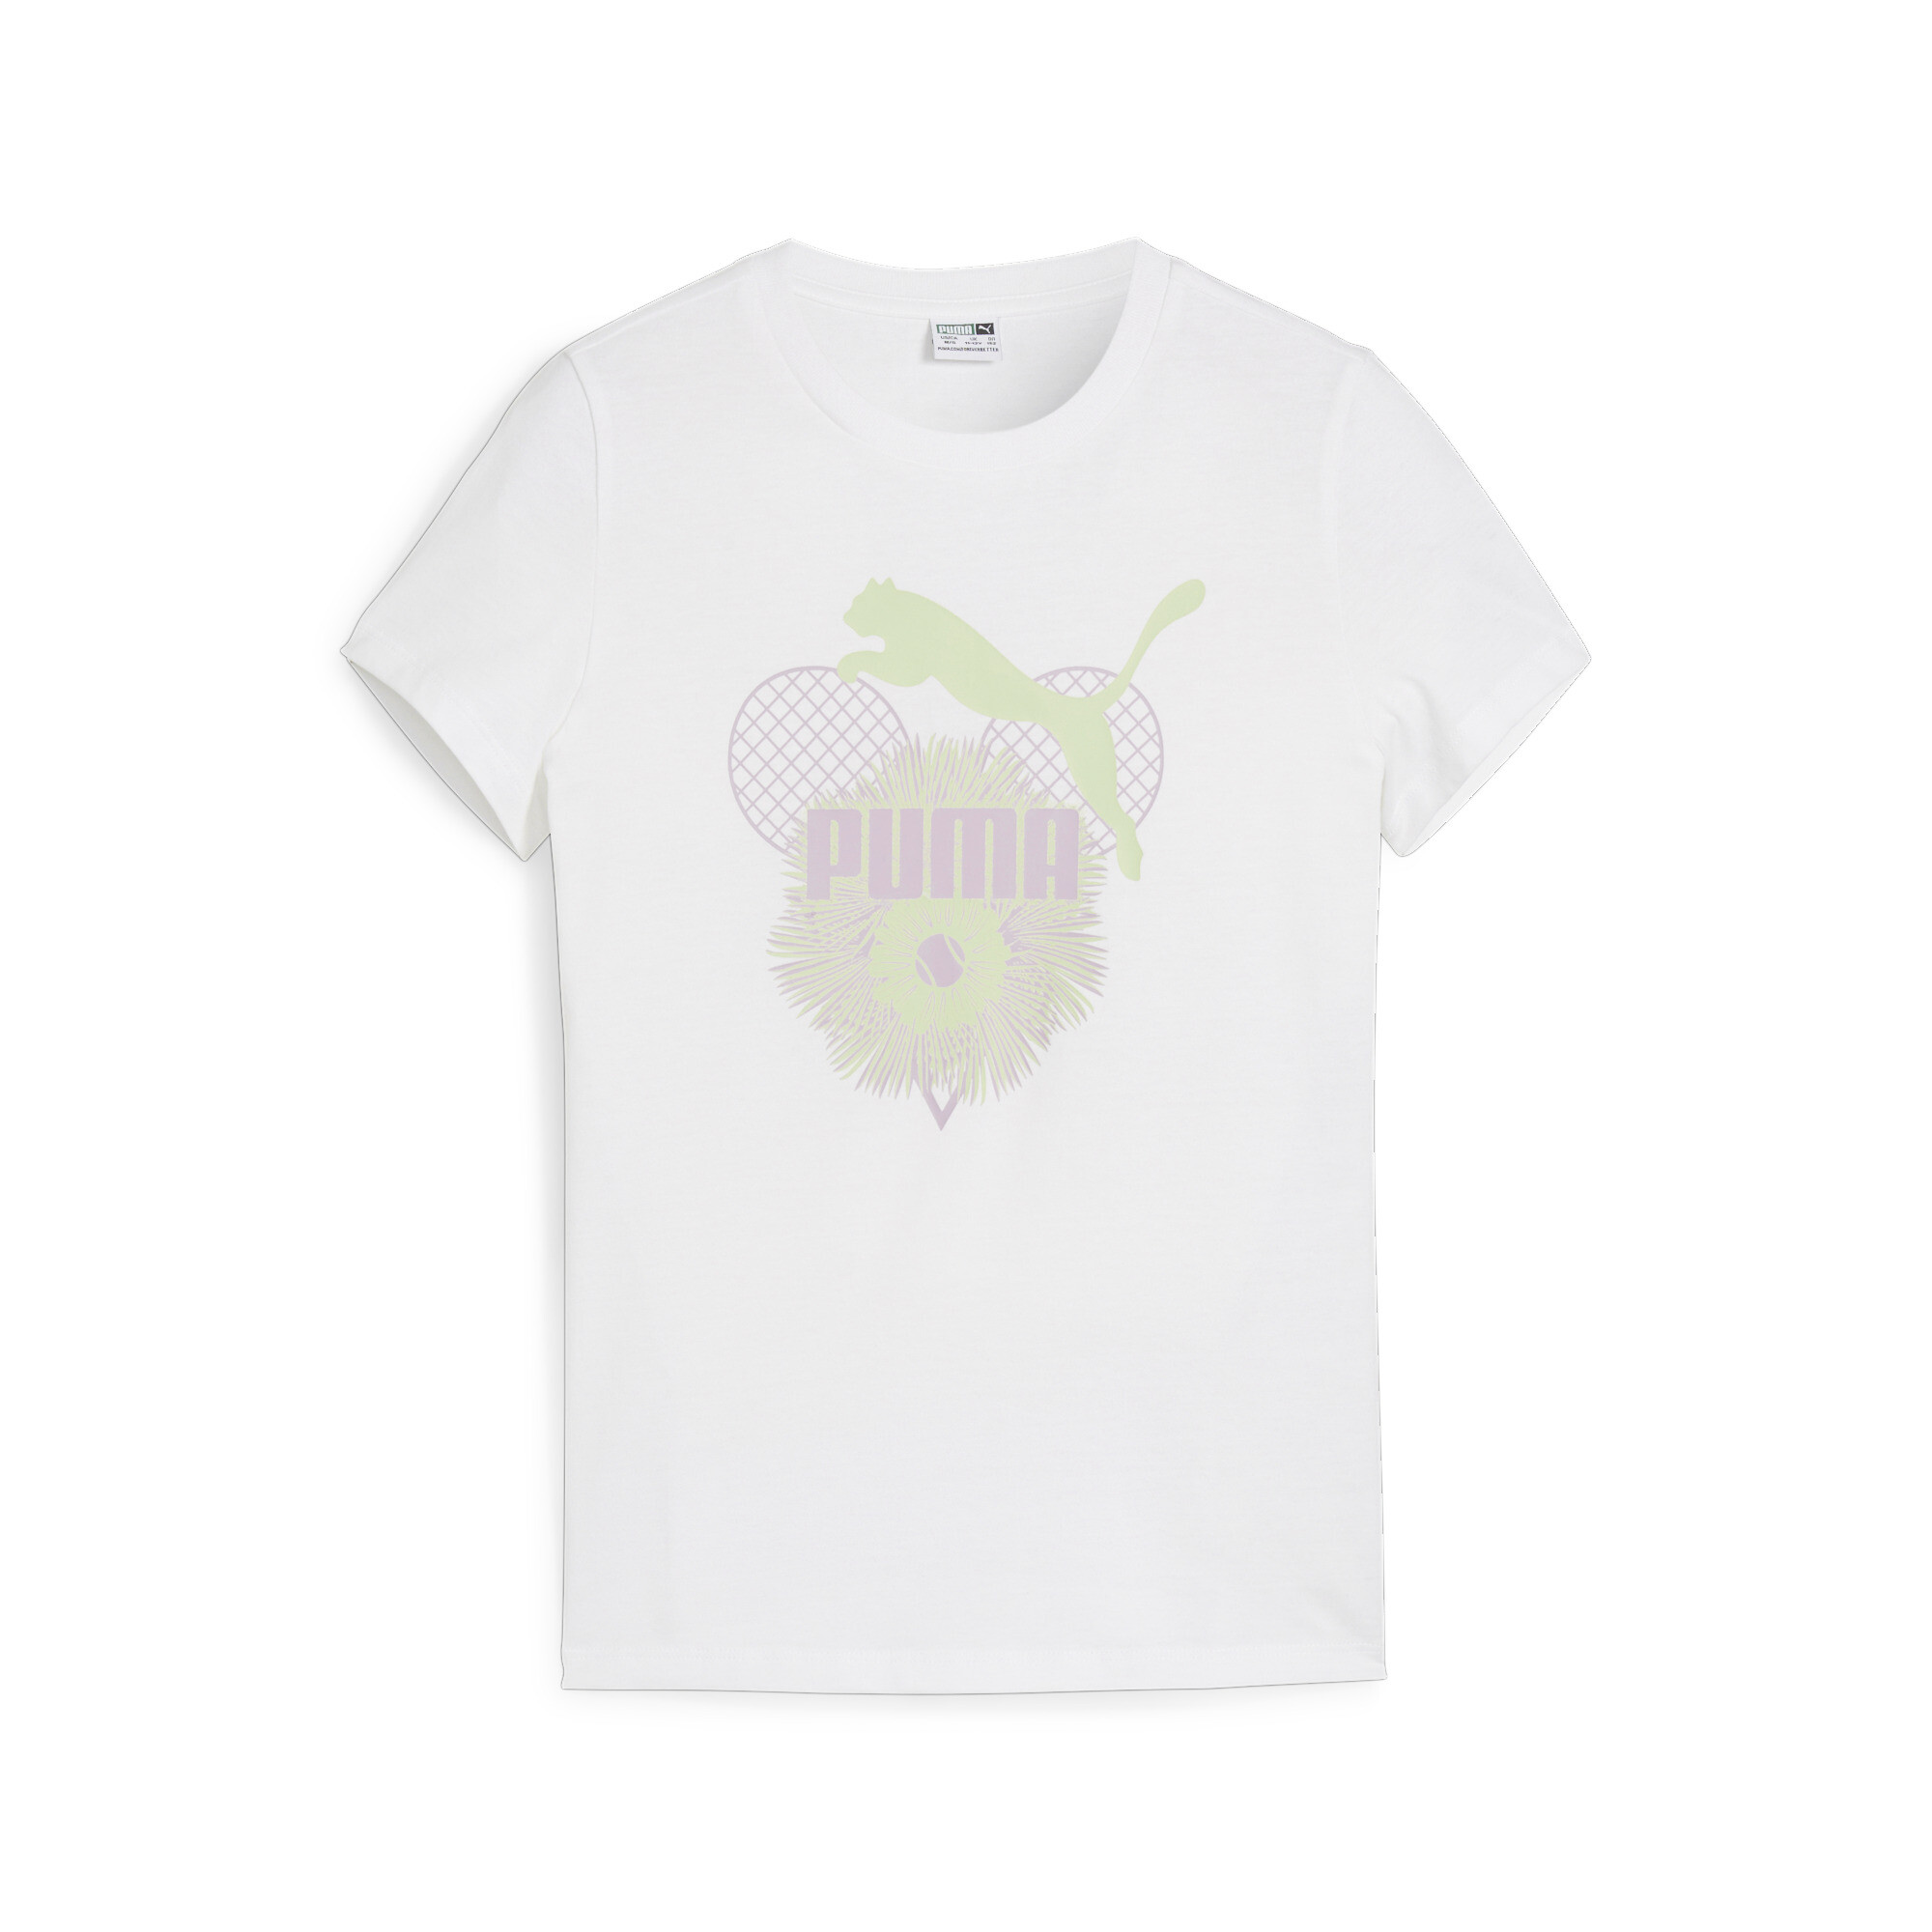 PUMA GRAPHICS MTCH PNT T-Shirt In White, Size 13-14 Youth